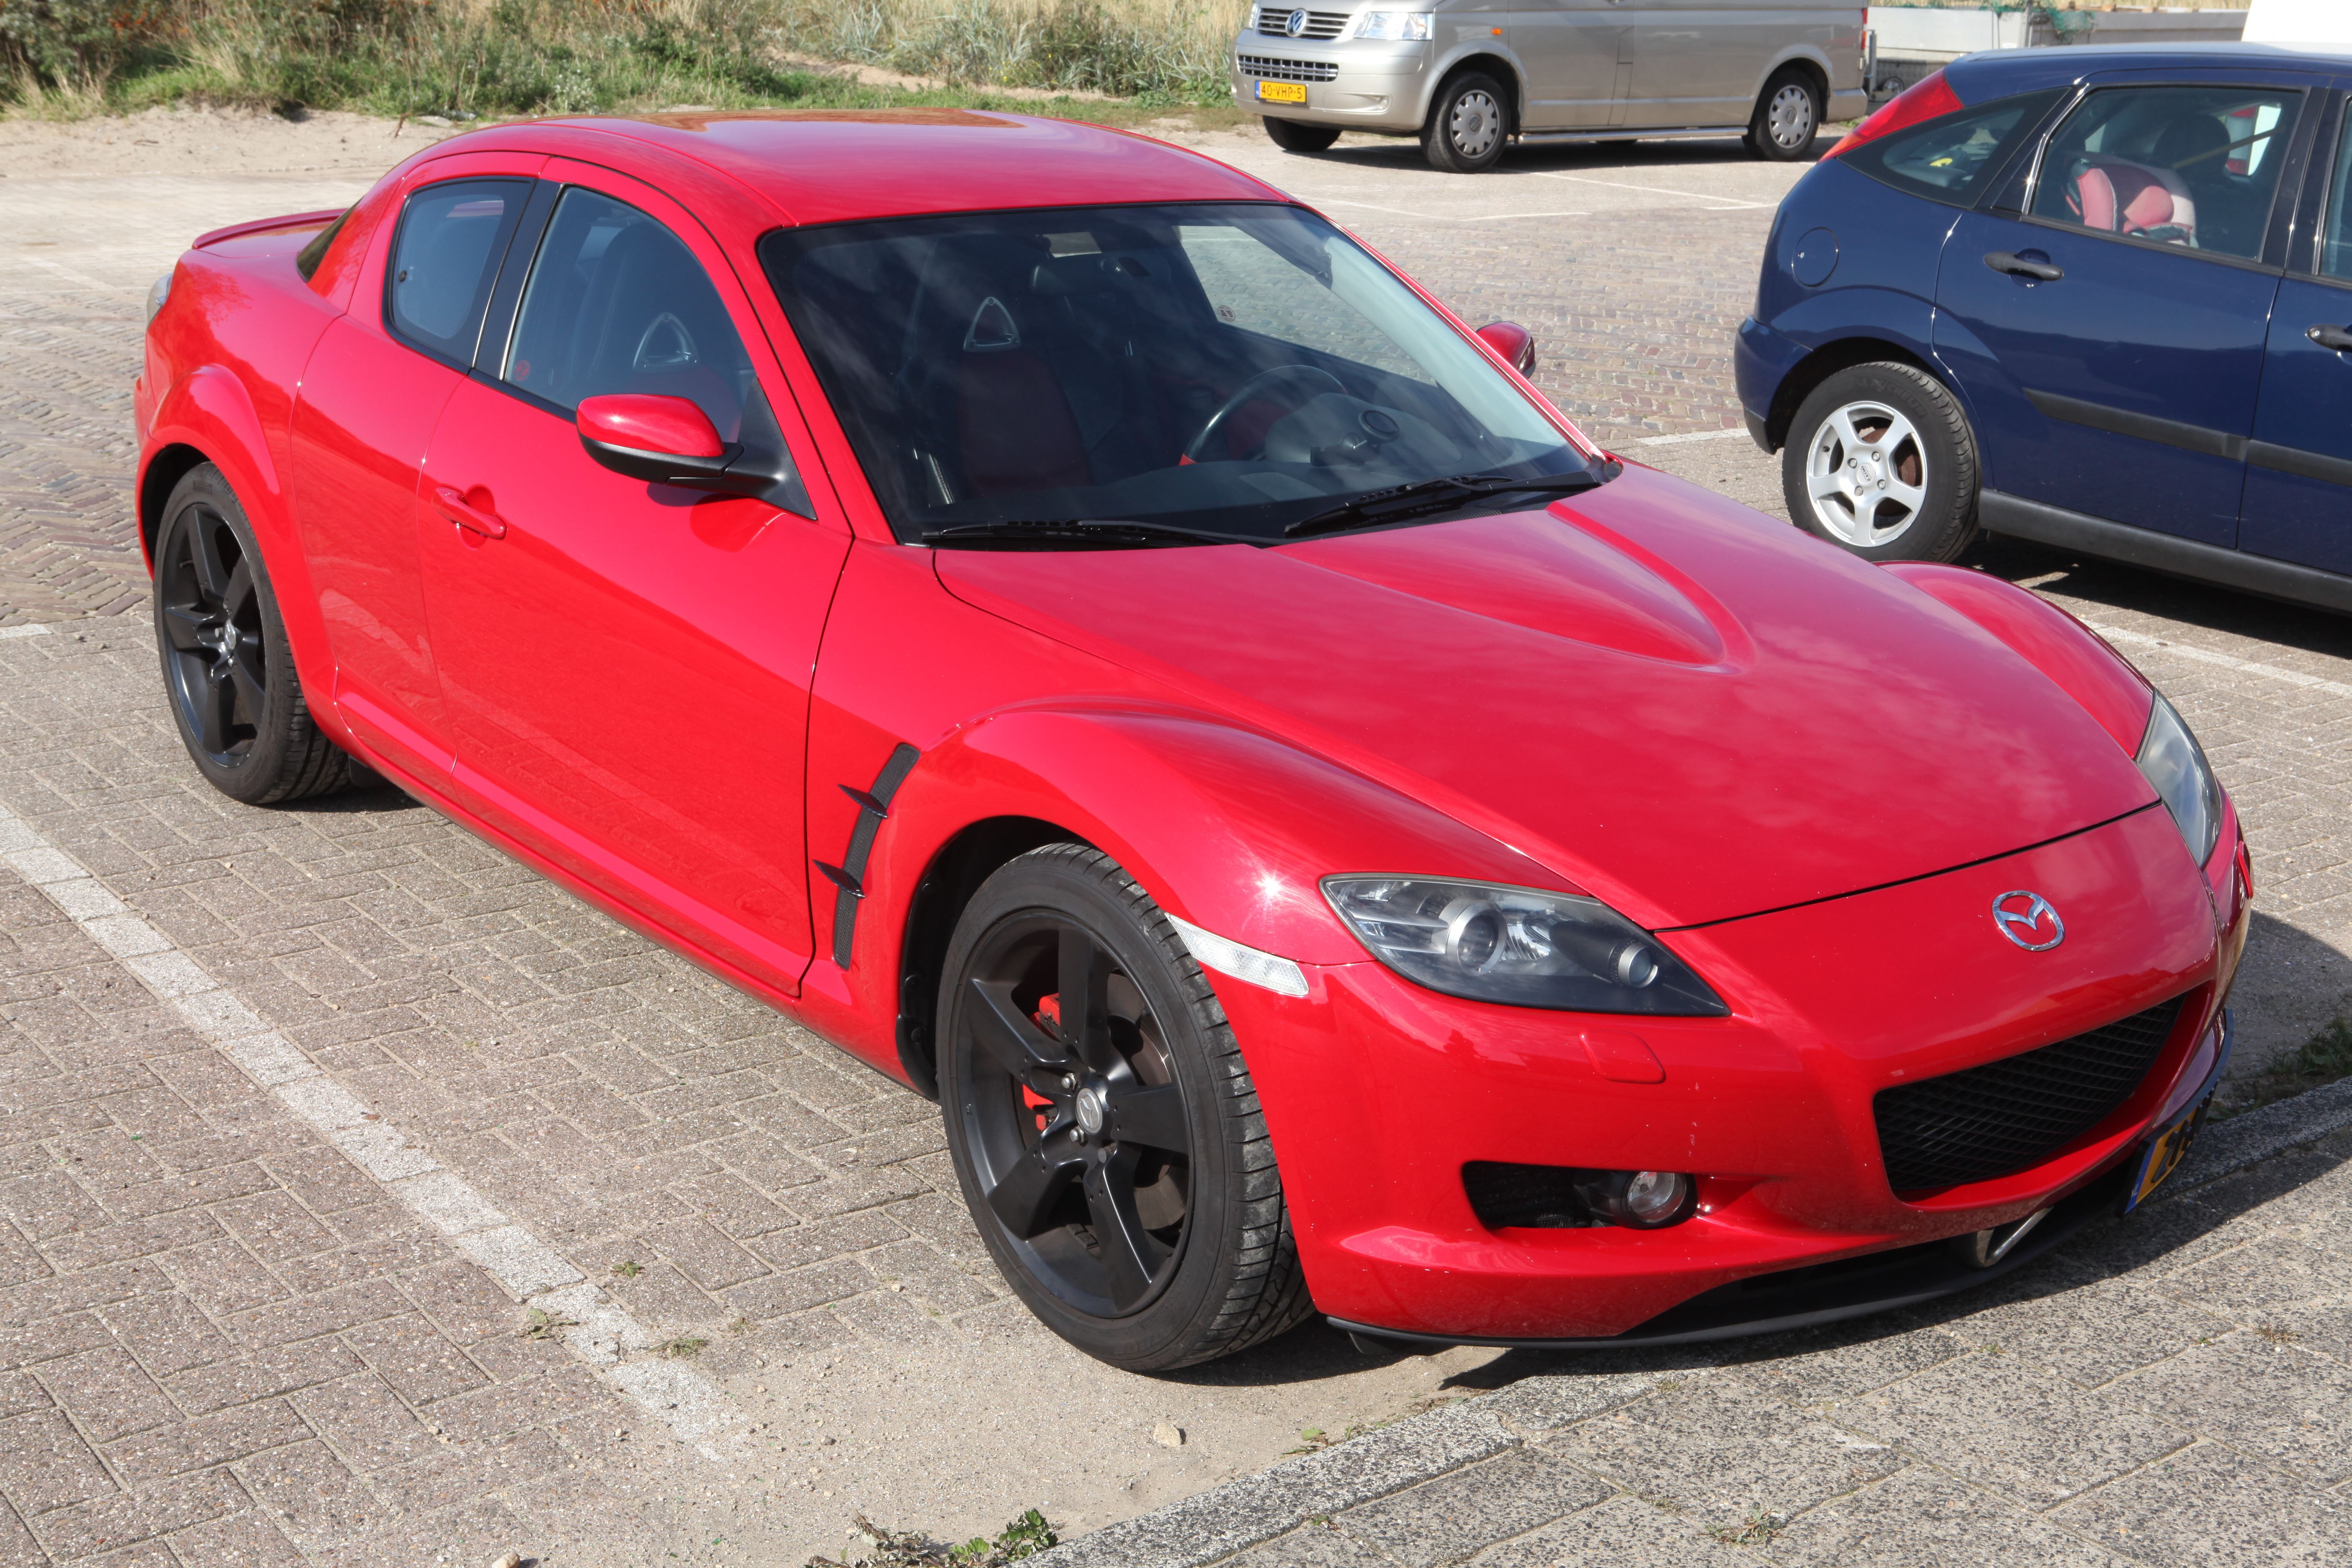 red 2004 Mazda RX-8 on the parking lot